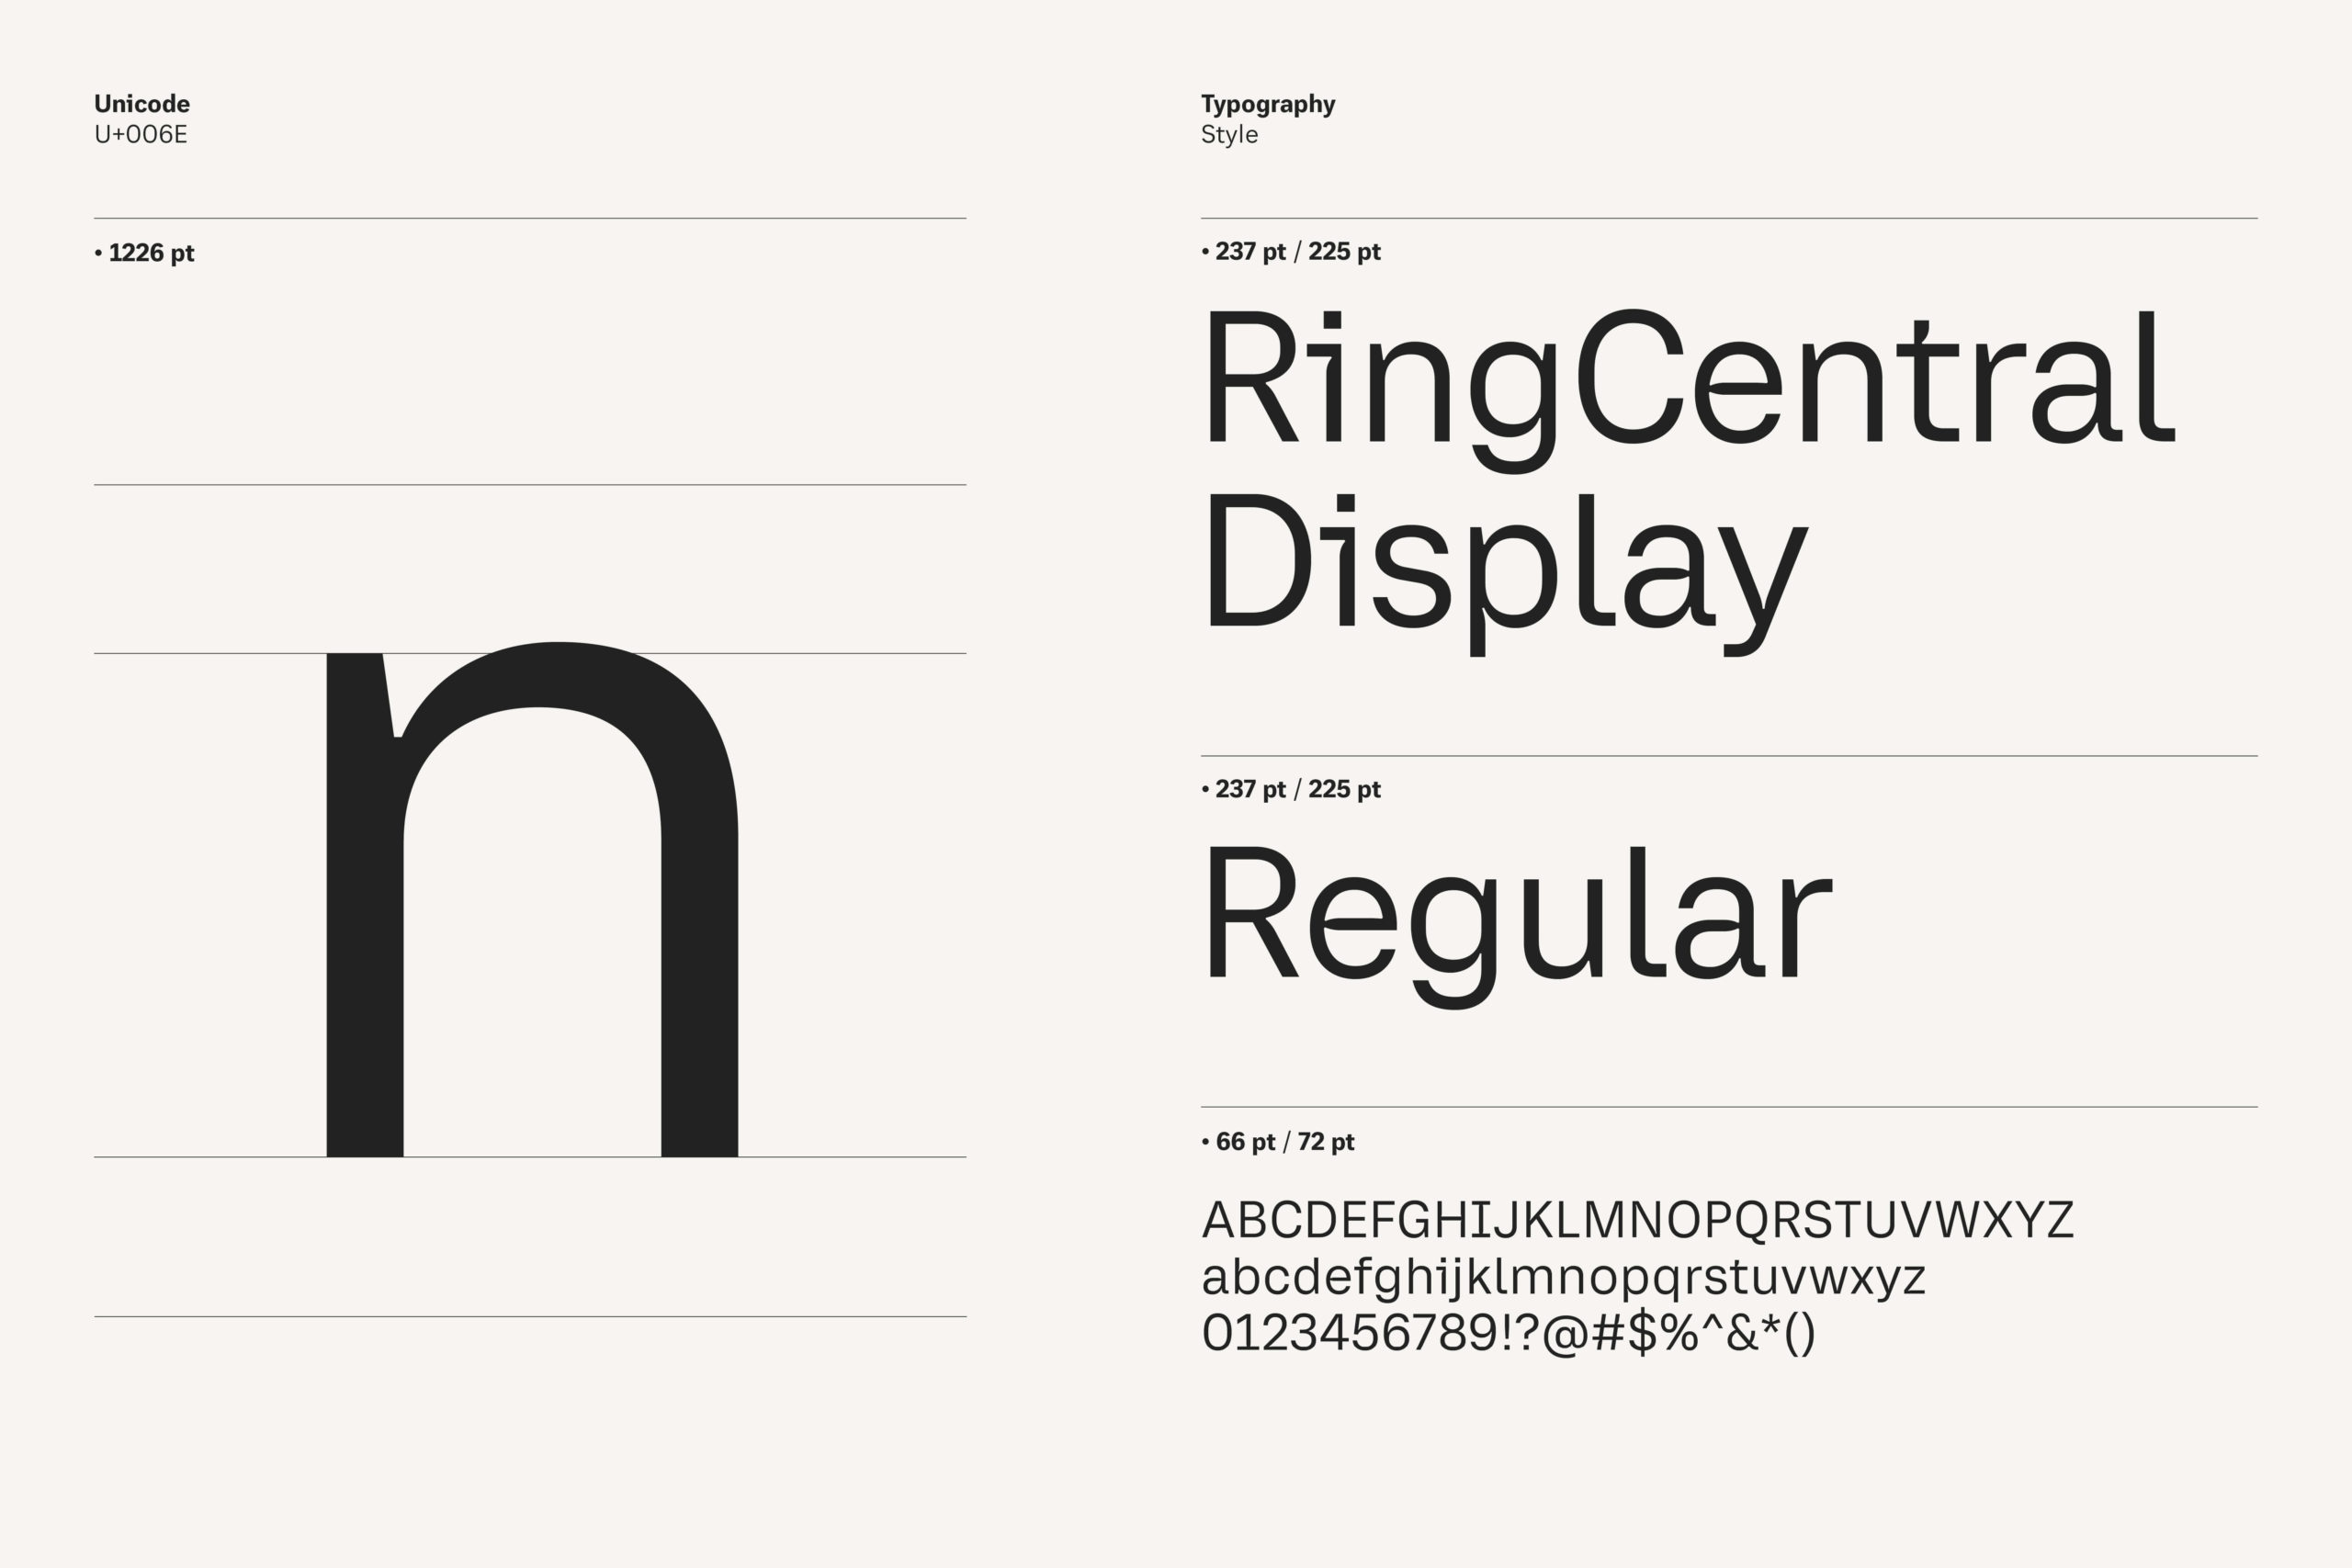 RingCentral Display_Typeface_09142211